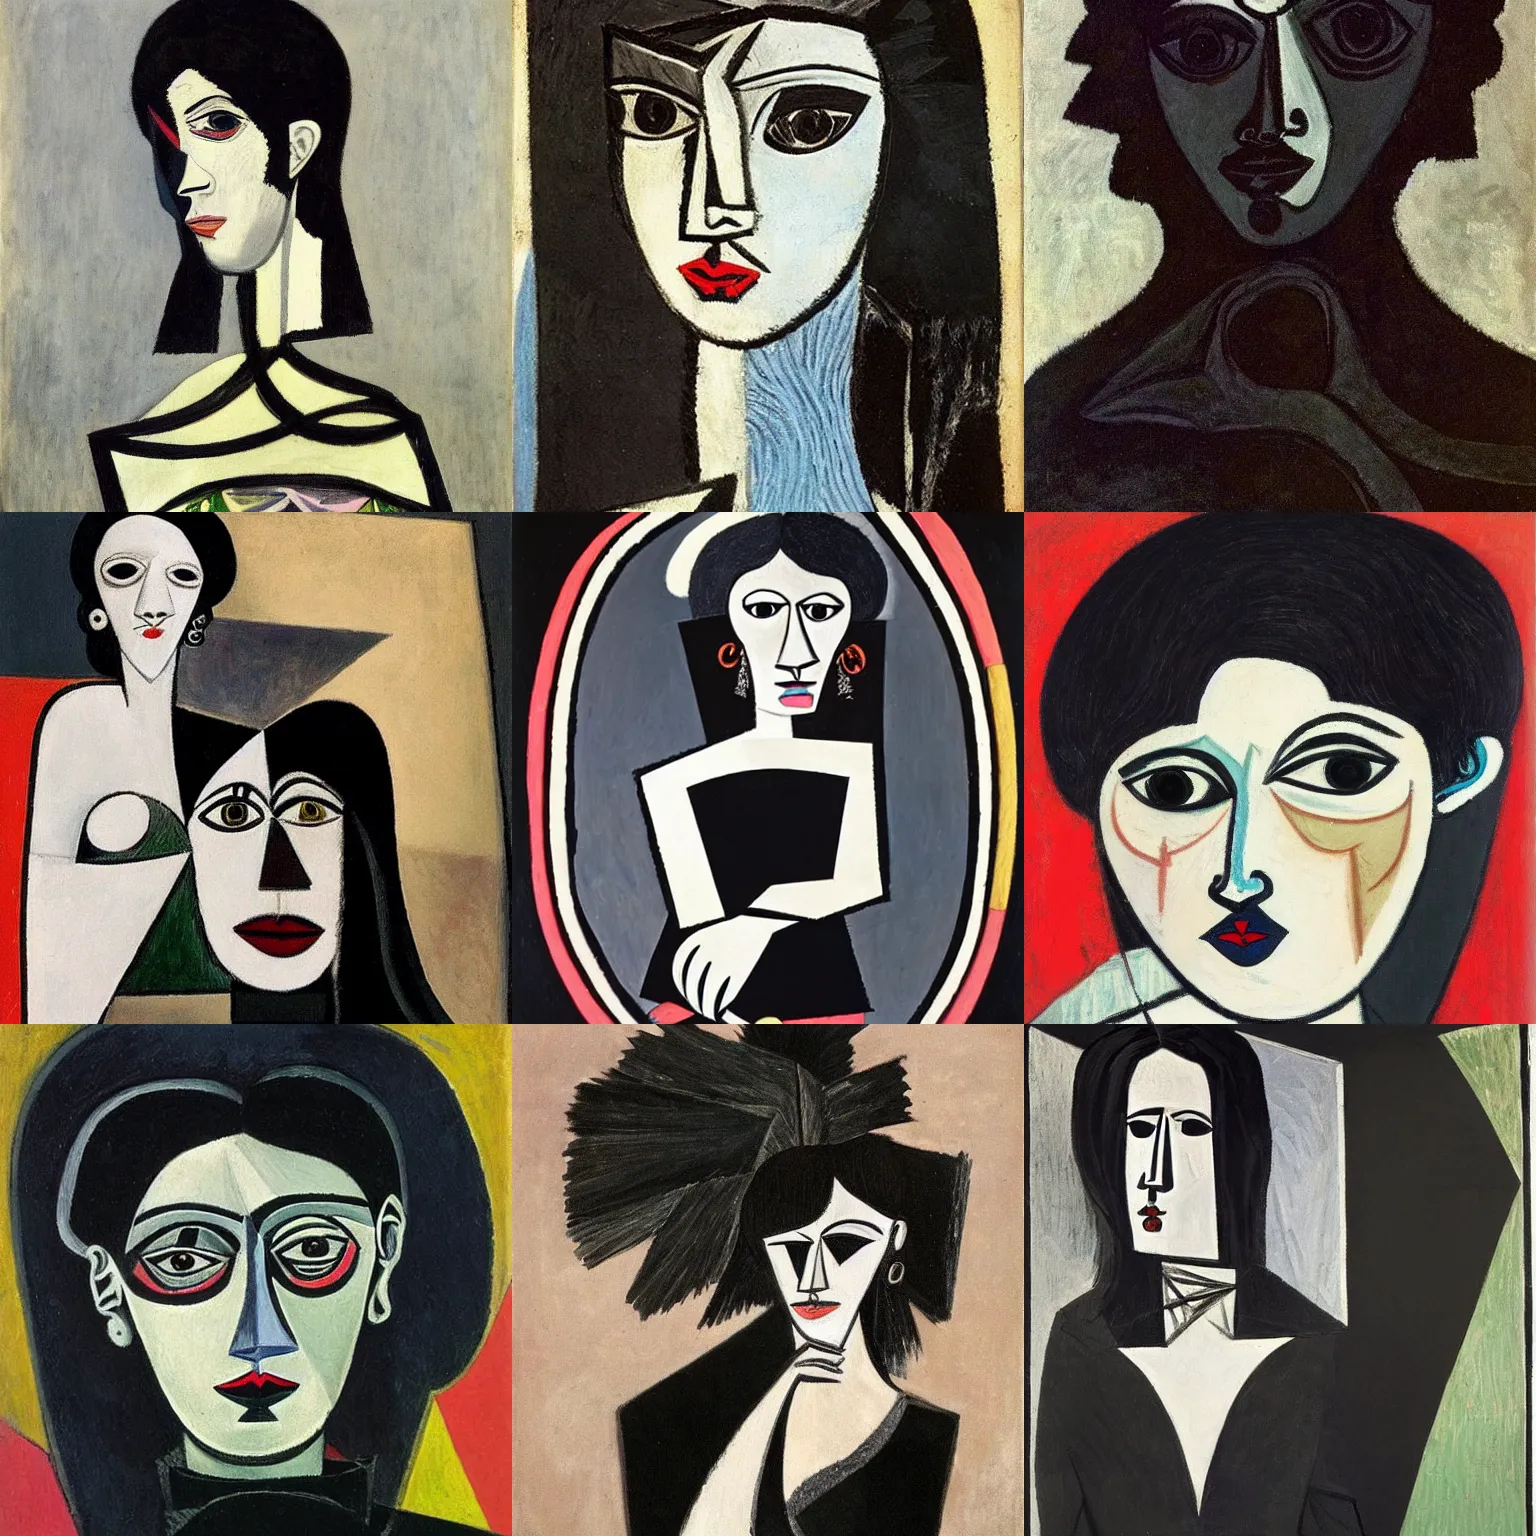 Prompt: A goth portrait painted by Pablo Picasso. Her hair is dark brown and cut into a short, messy pixie cut. She has large entirely-black evil eyes. She is wearing a black tank top, a black leather jacket, a black knee-length skirt, a black choker, and black leather boots.